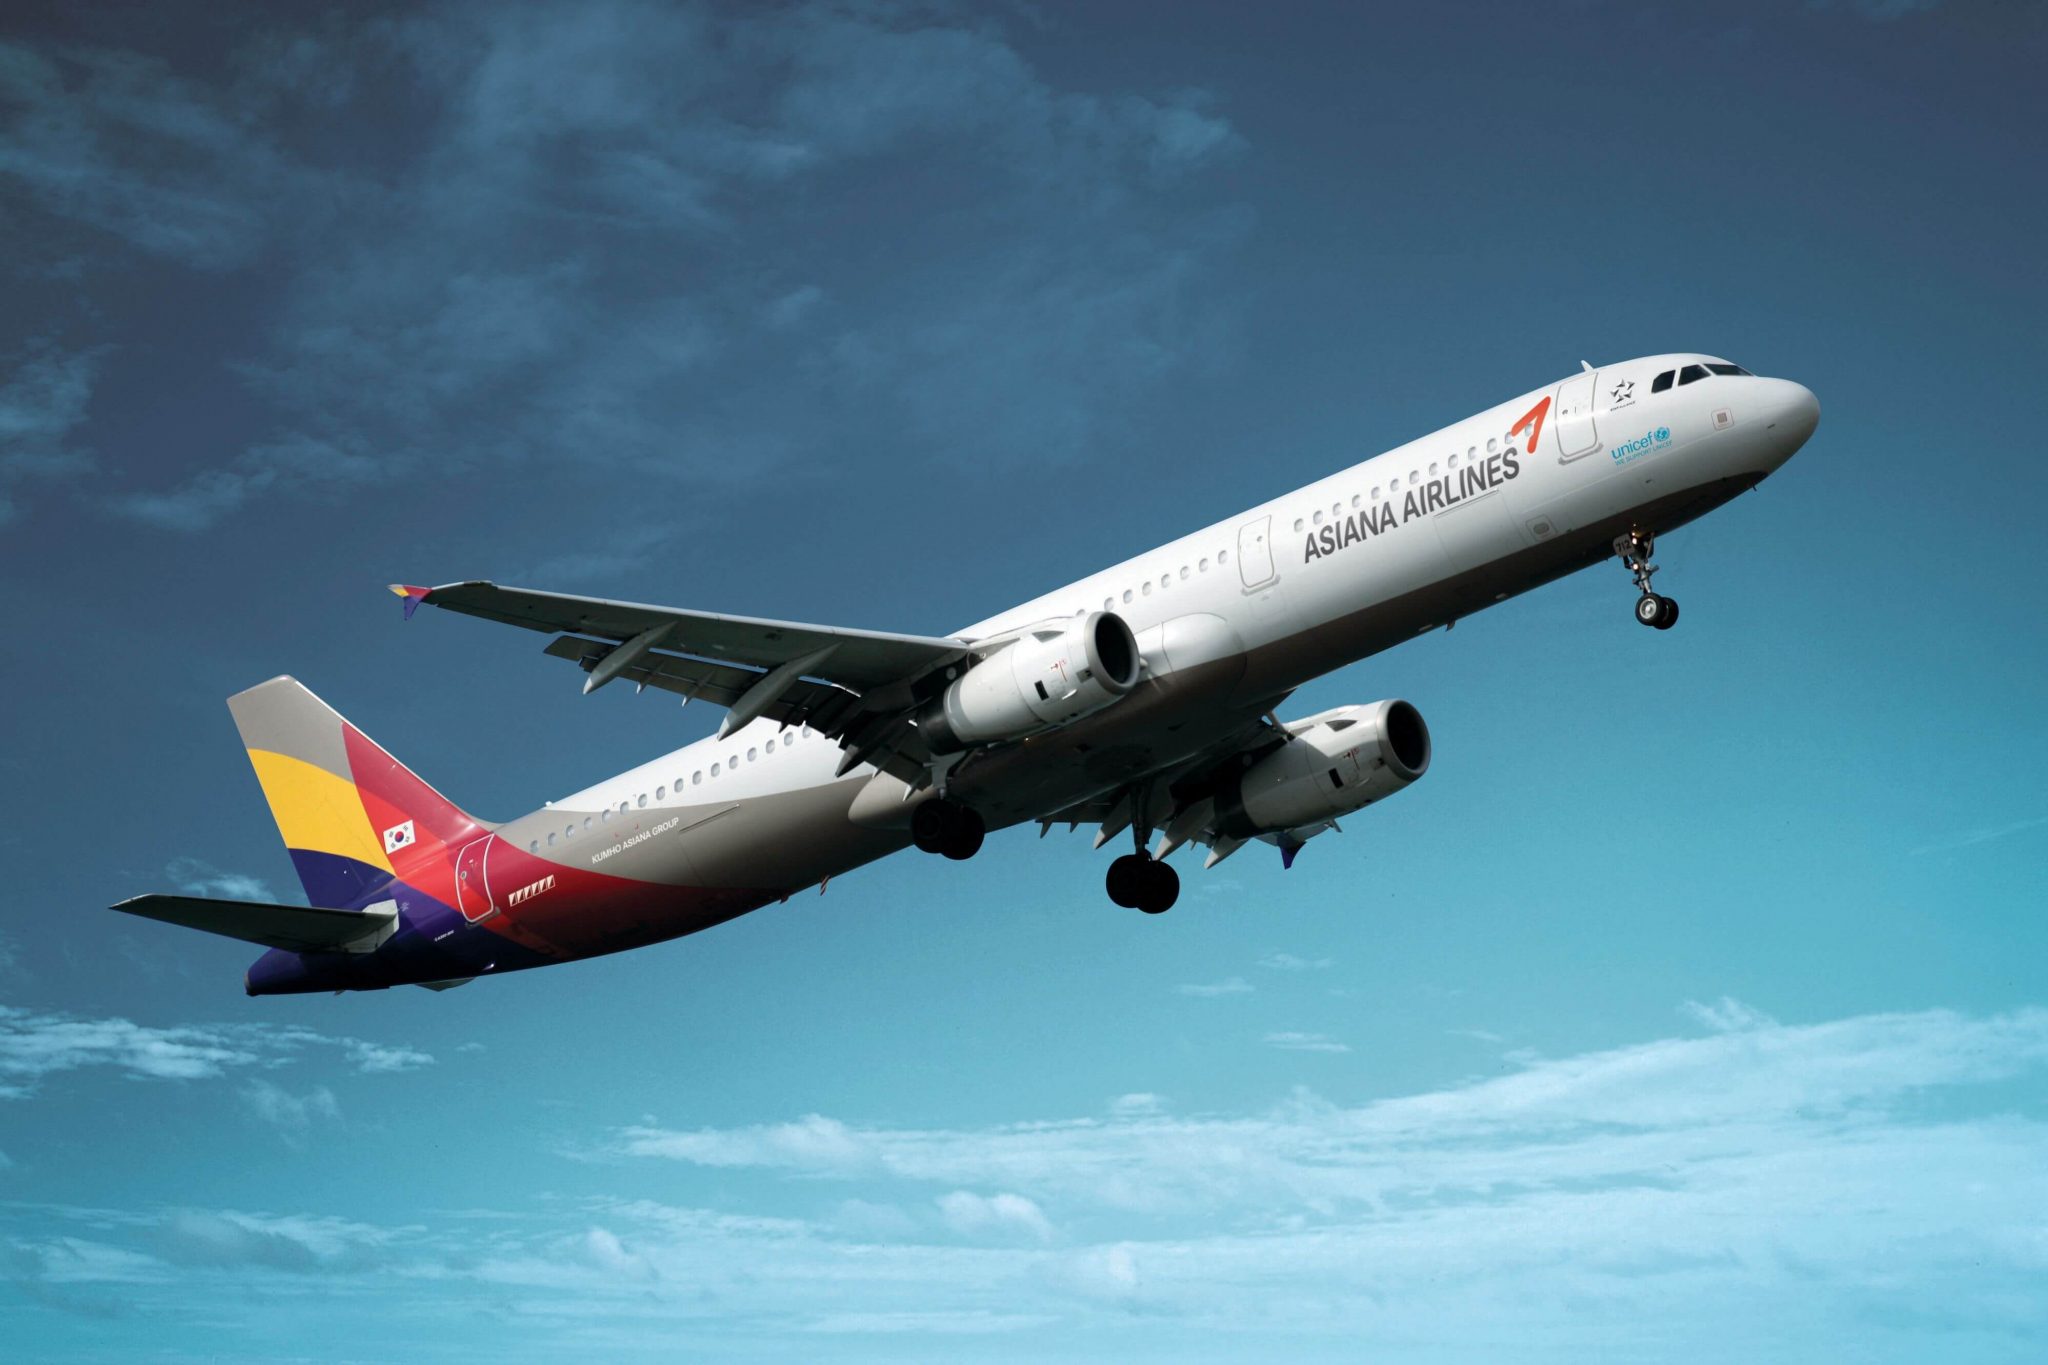 Asiana Airlines restored its refurbished cargo aircraft back to passenger